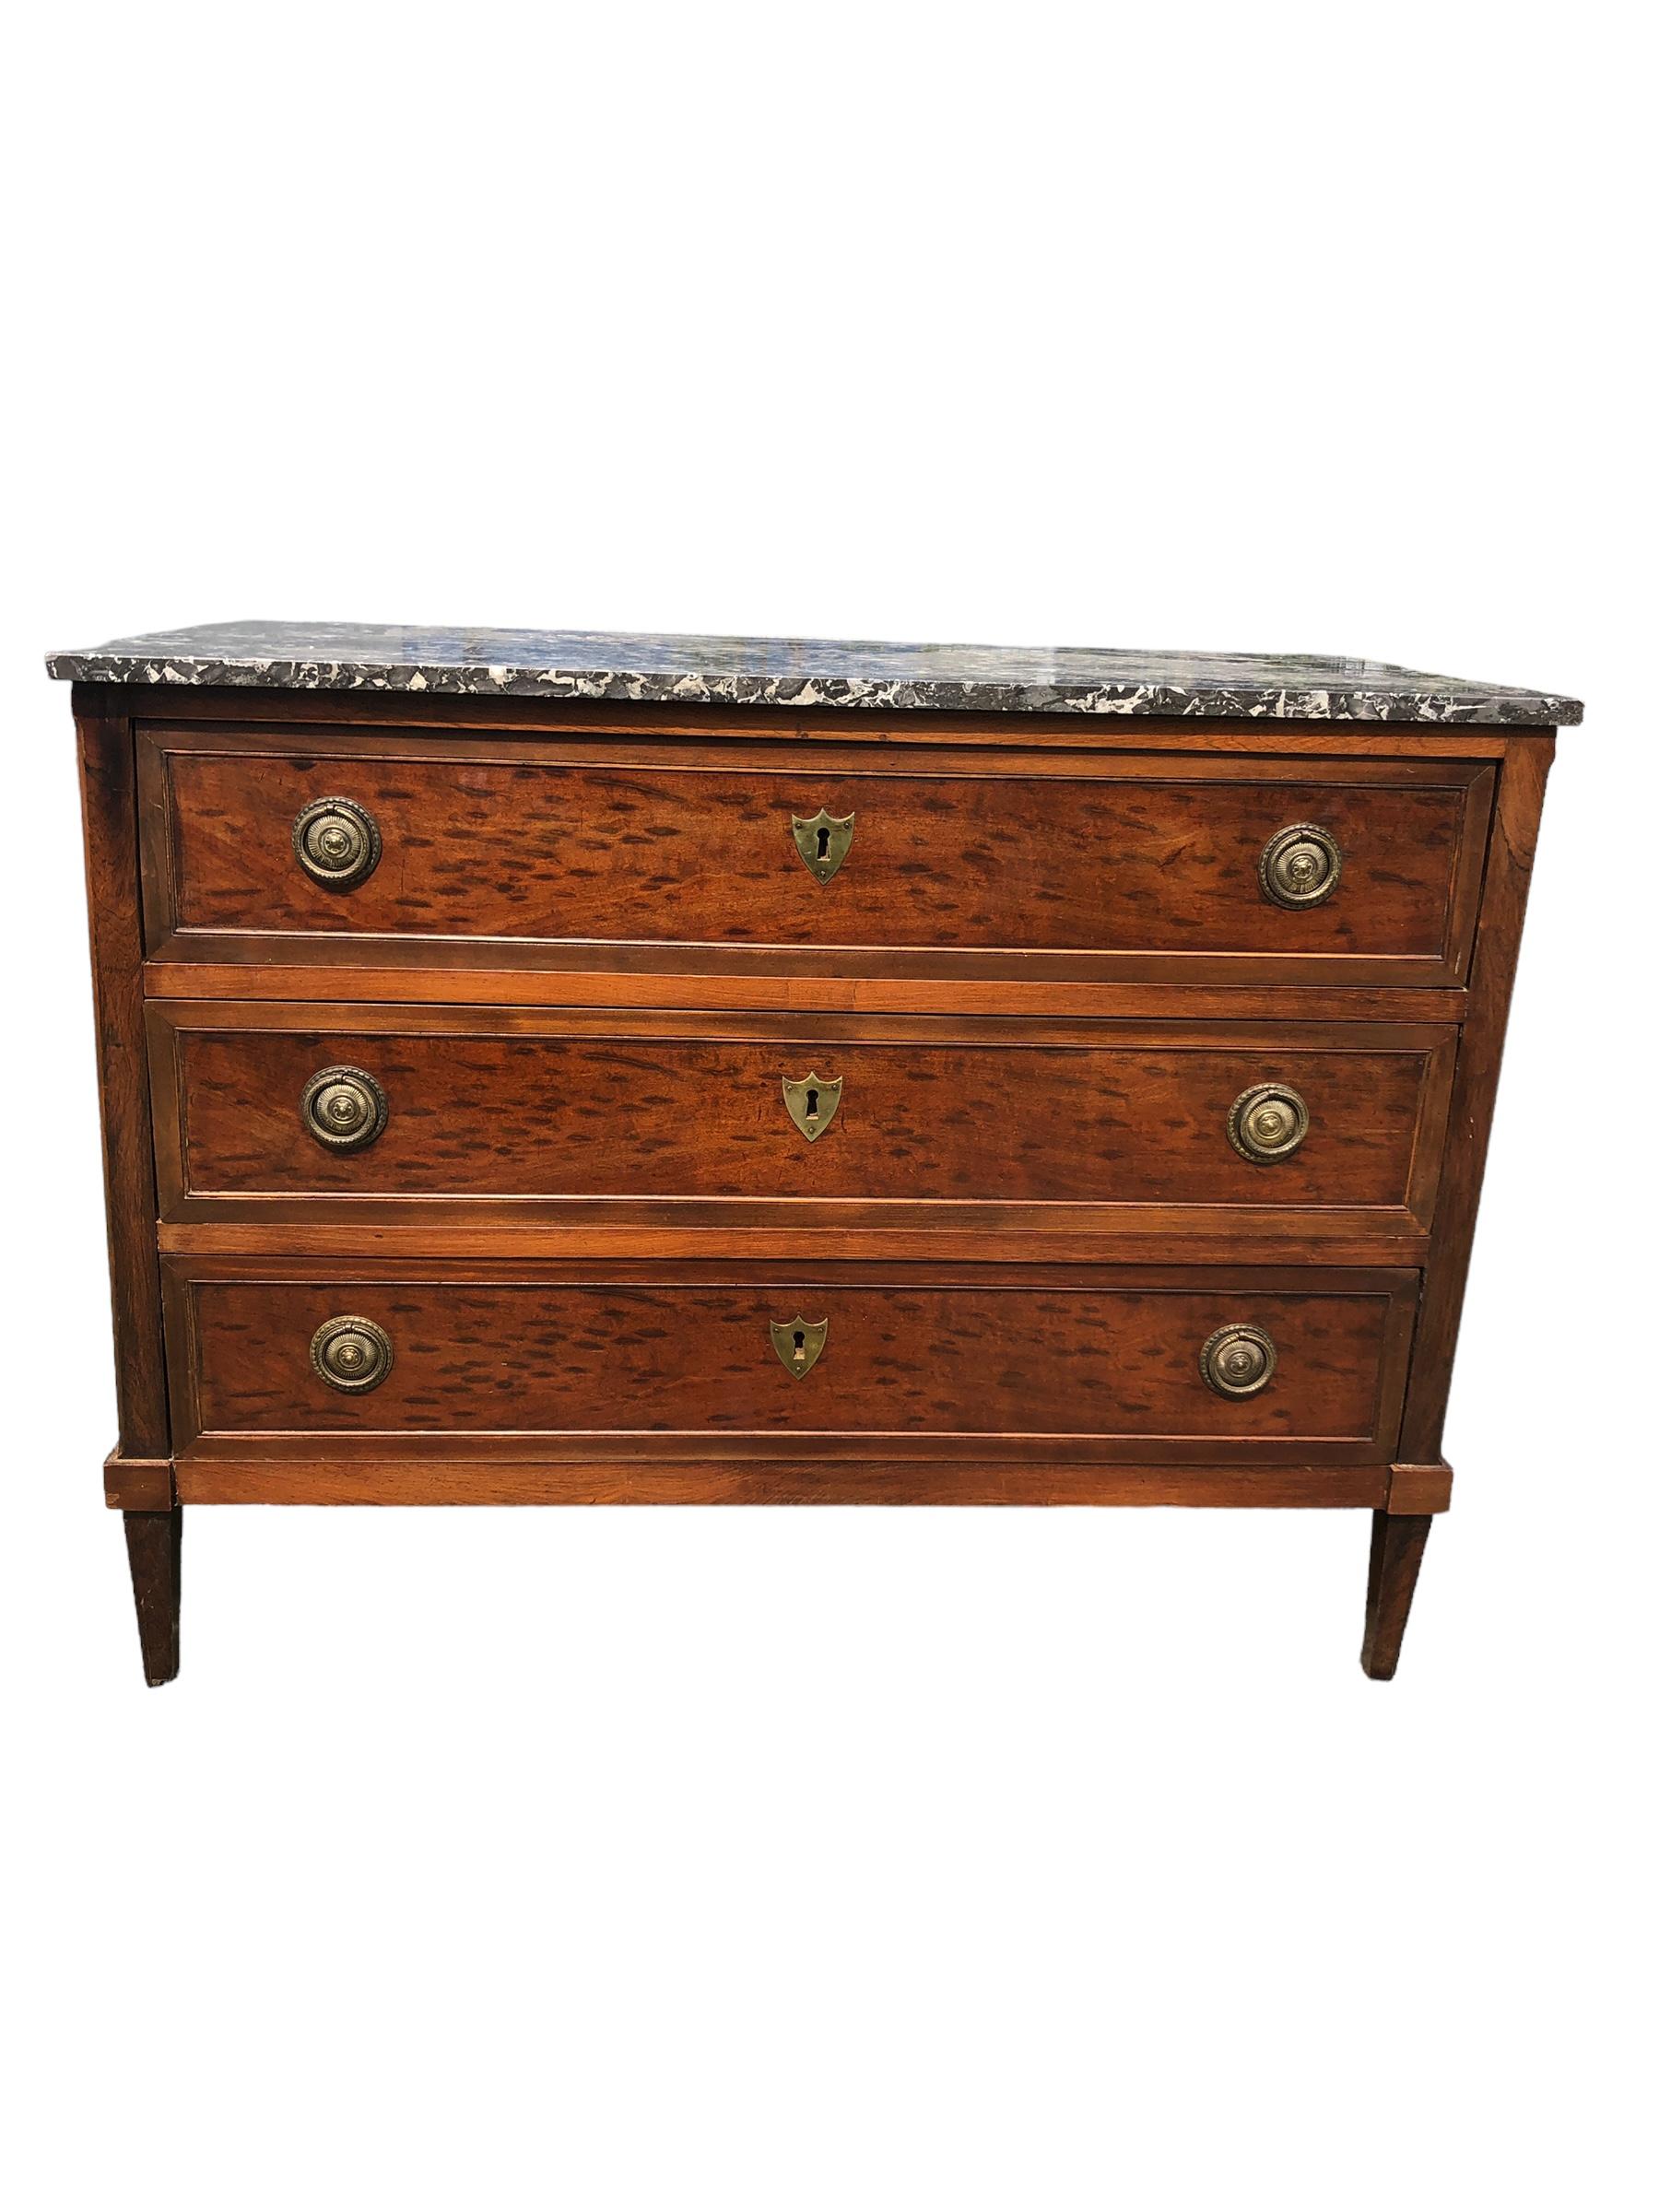 19th Century Louis XVI Style Marble Top Plum Pudding Mahogany Chest For Sale 7